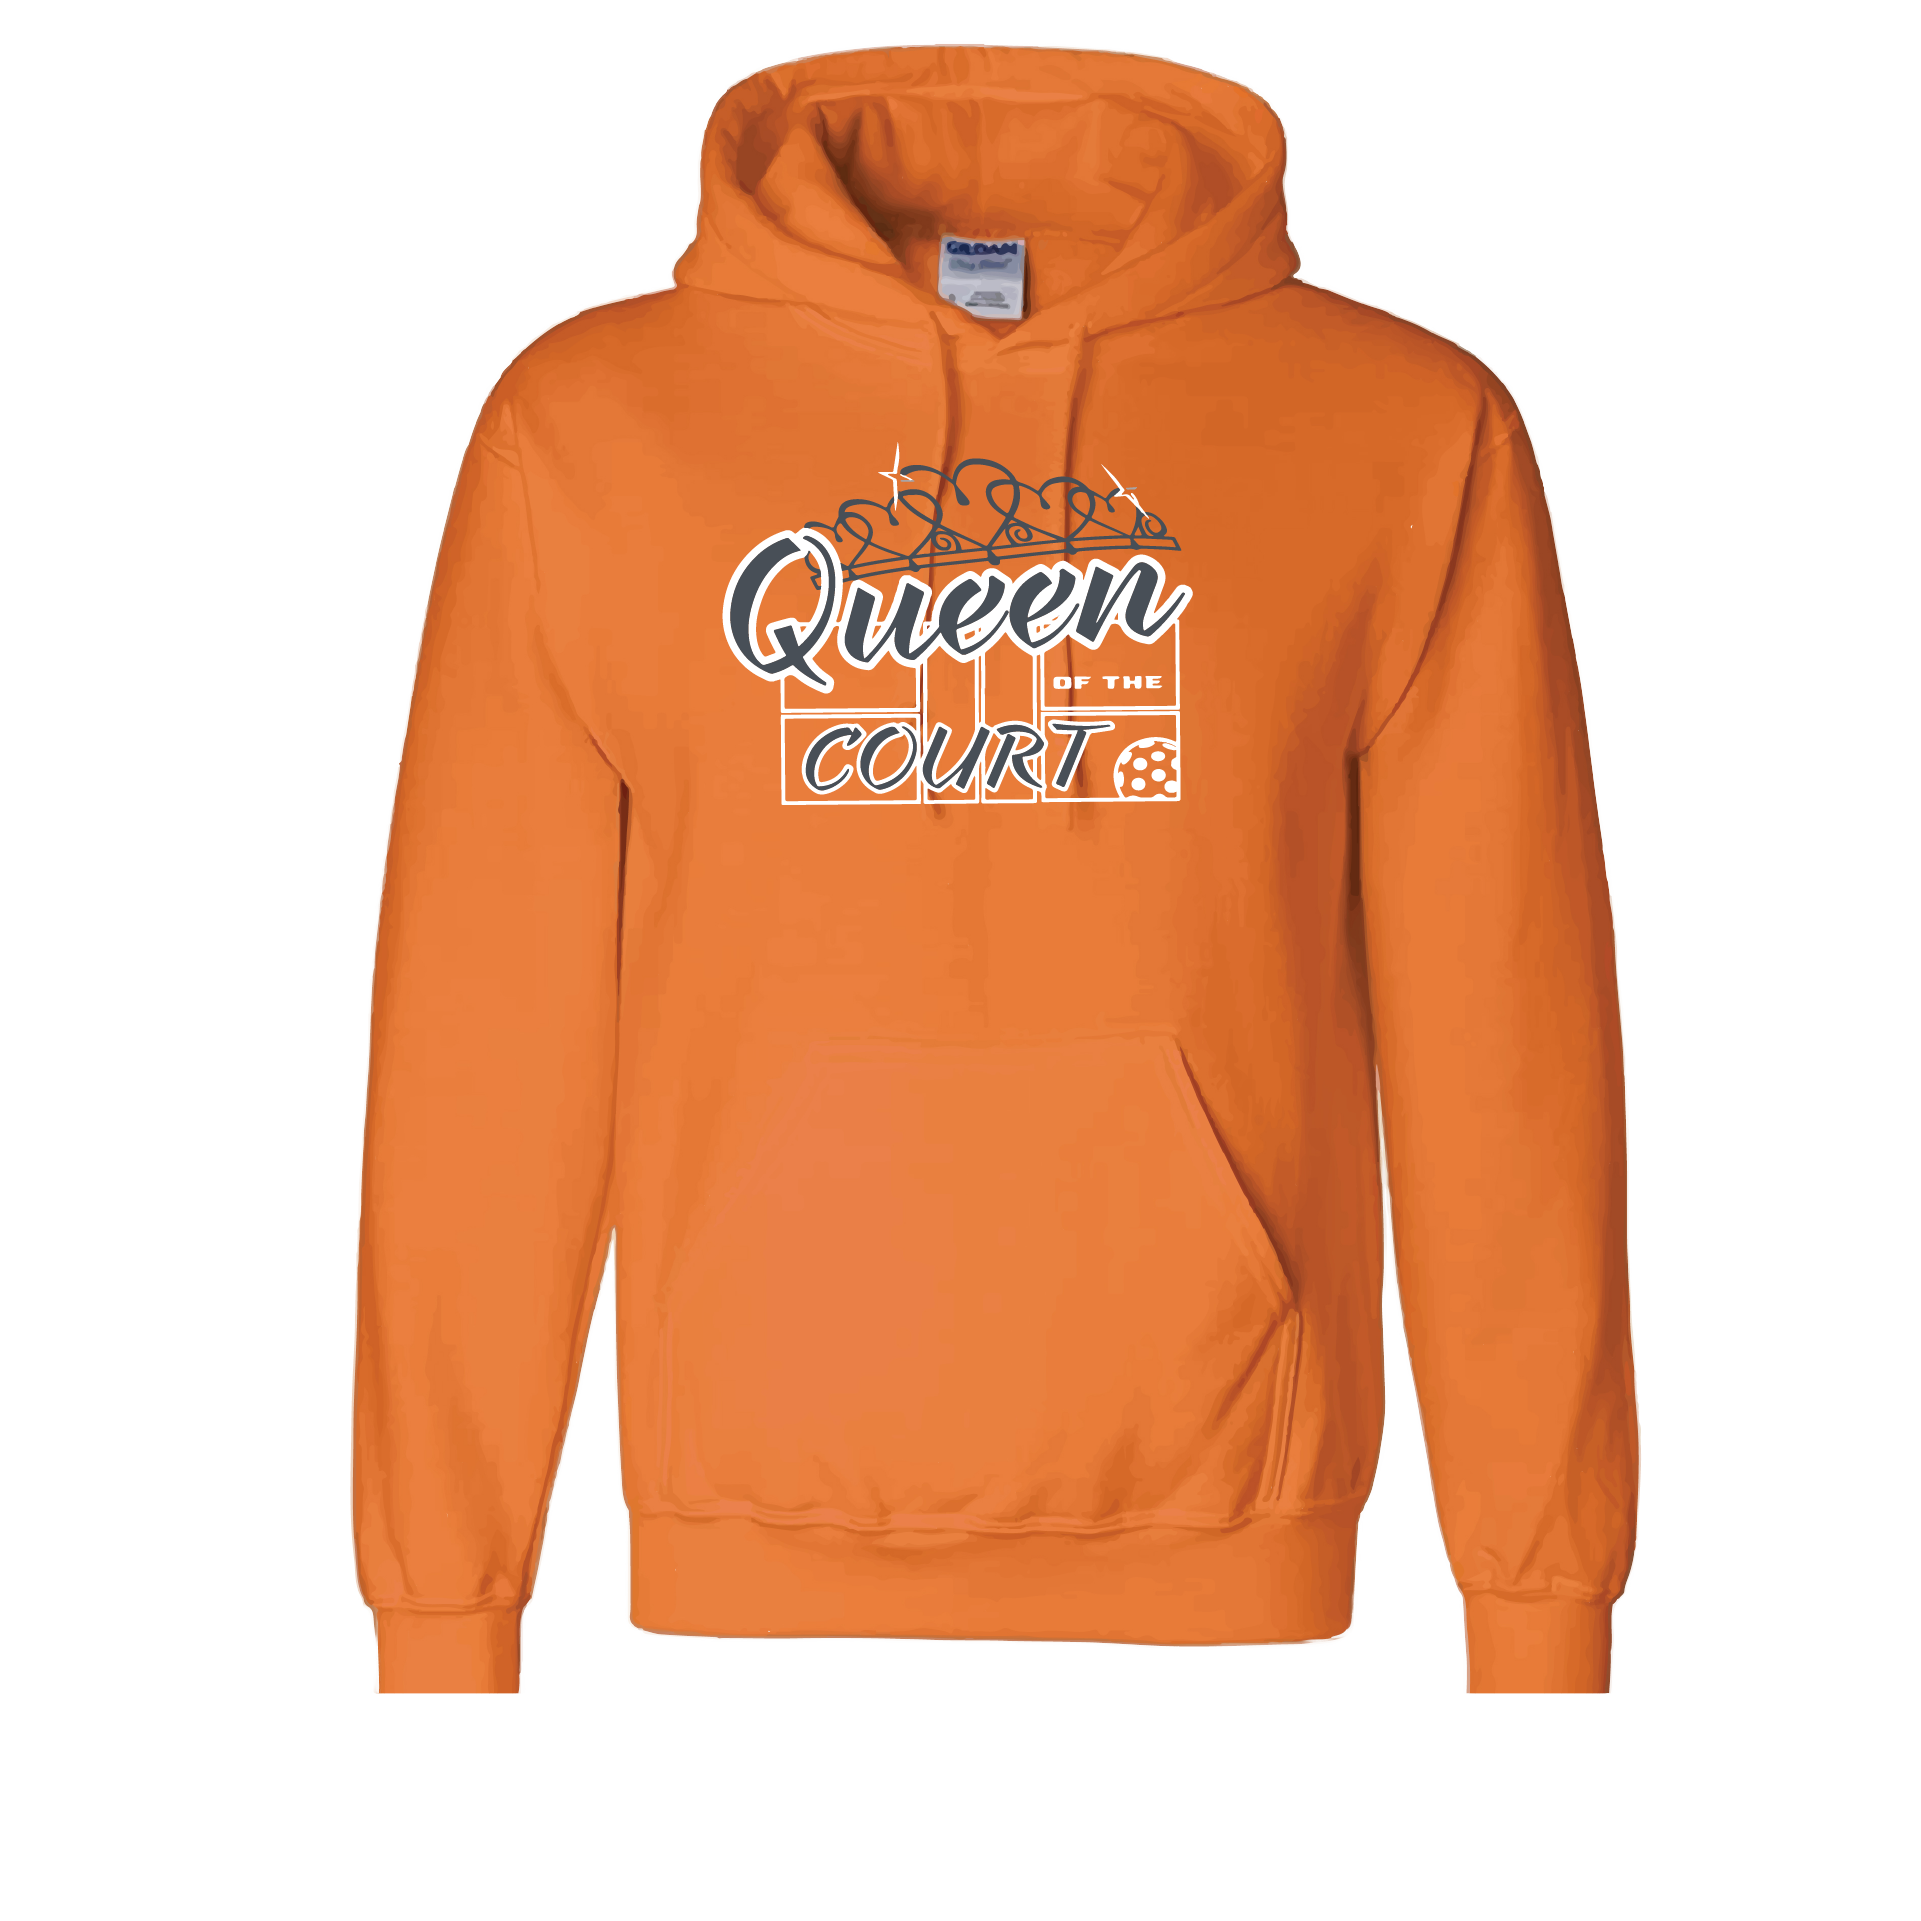 Pickleball Design: Queen of the Court  Unisex Hooded Sweatshirt:  Moisture-wicking, double-lined hood, front pouch pocket.  This unisex hooded sweatshirt is ultra comfortable and soft. Stay warm on the Pickleball courts while being that hit with this one of kind design.